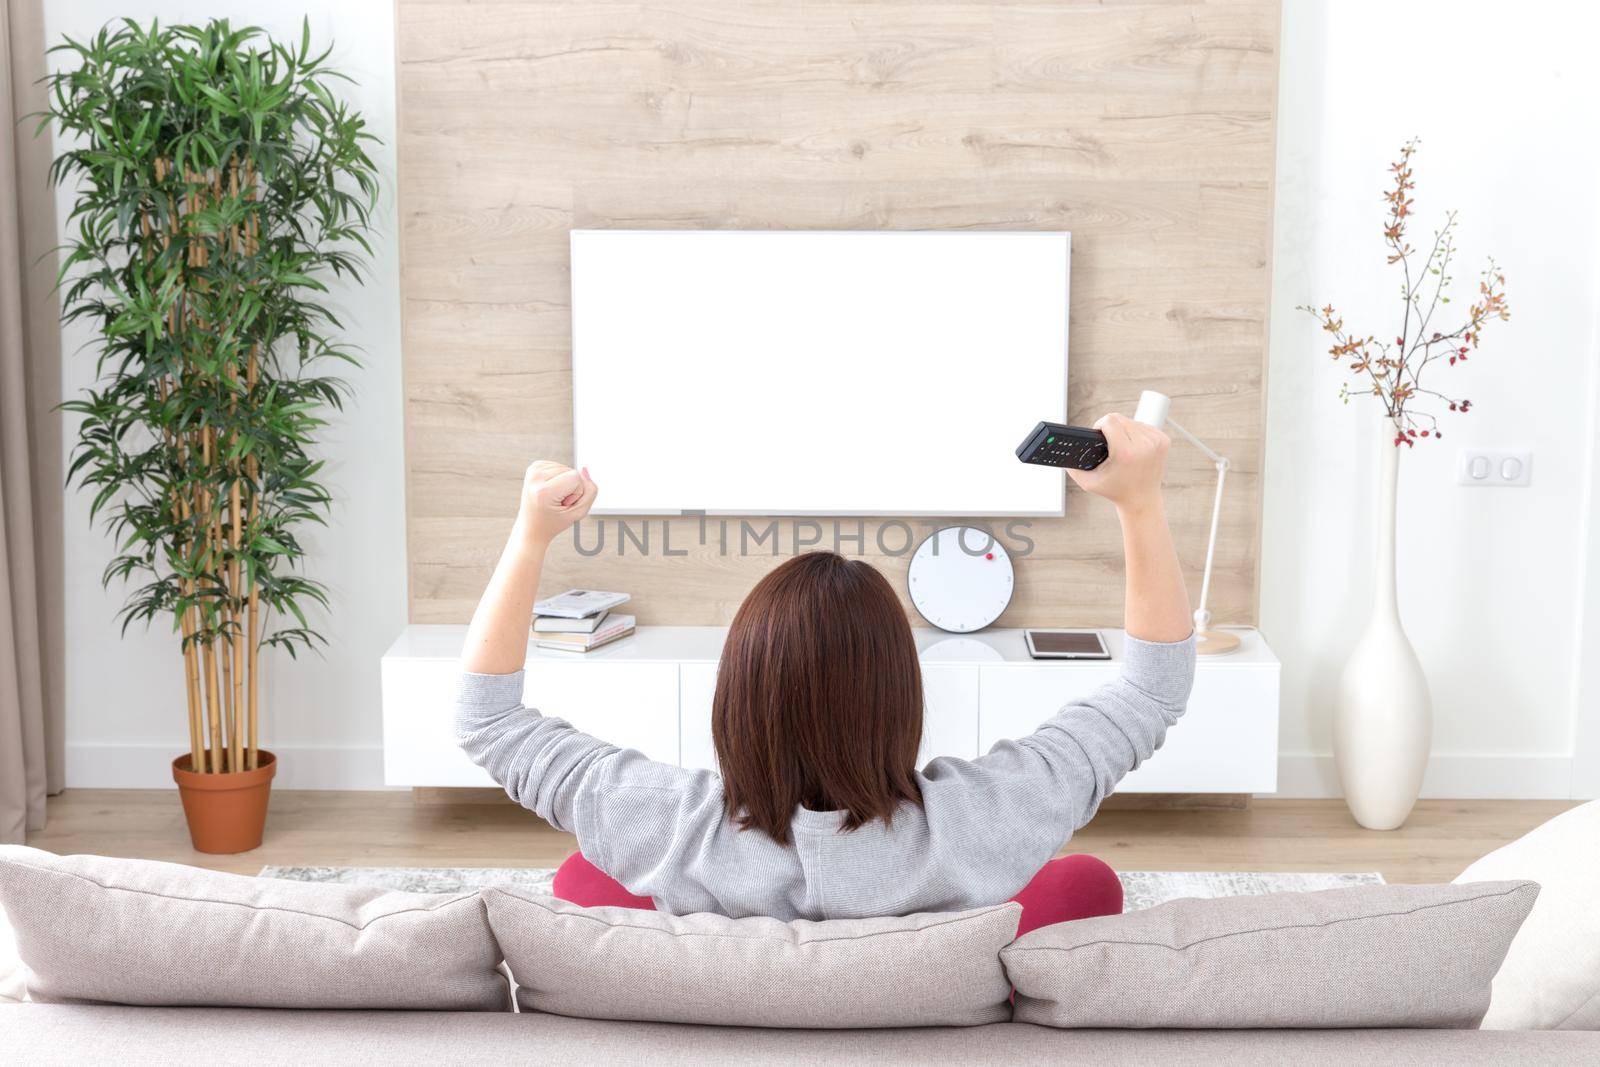 young happy woman watching alone excited television football sport match or TV contest